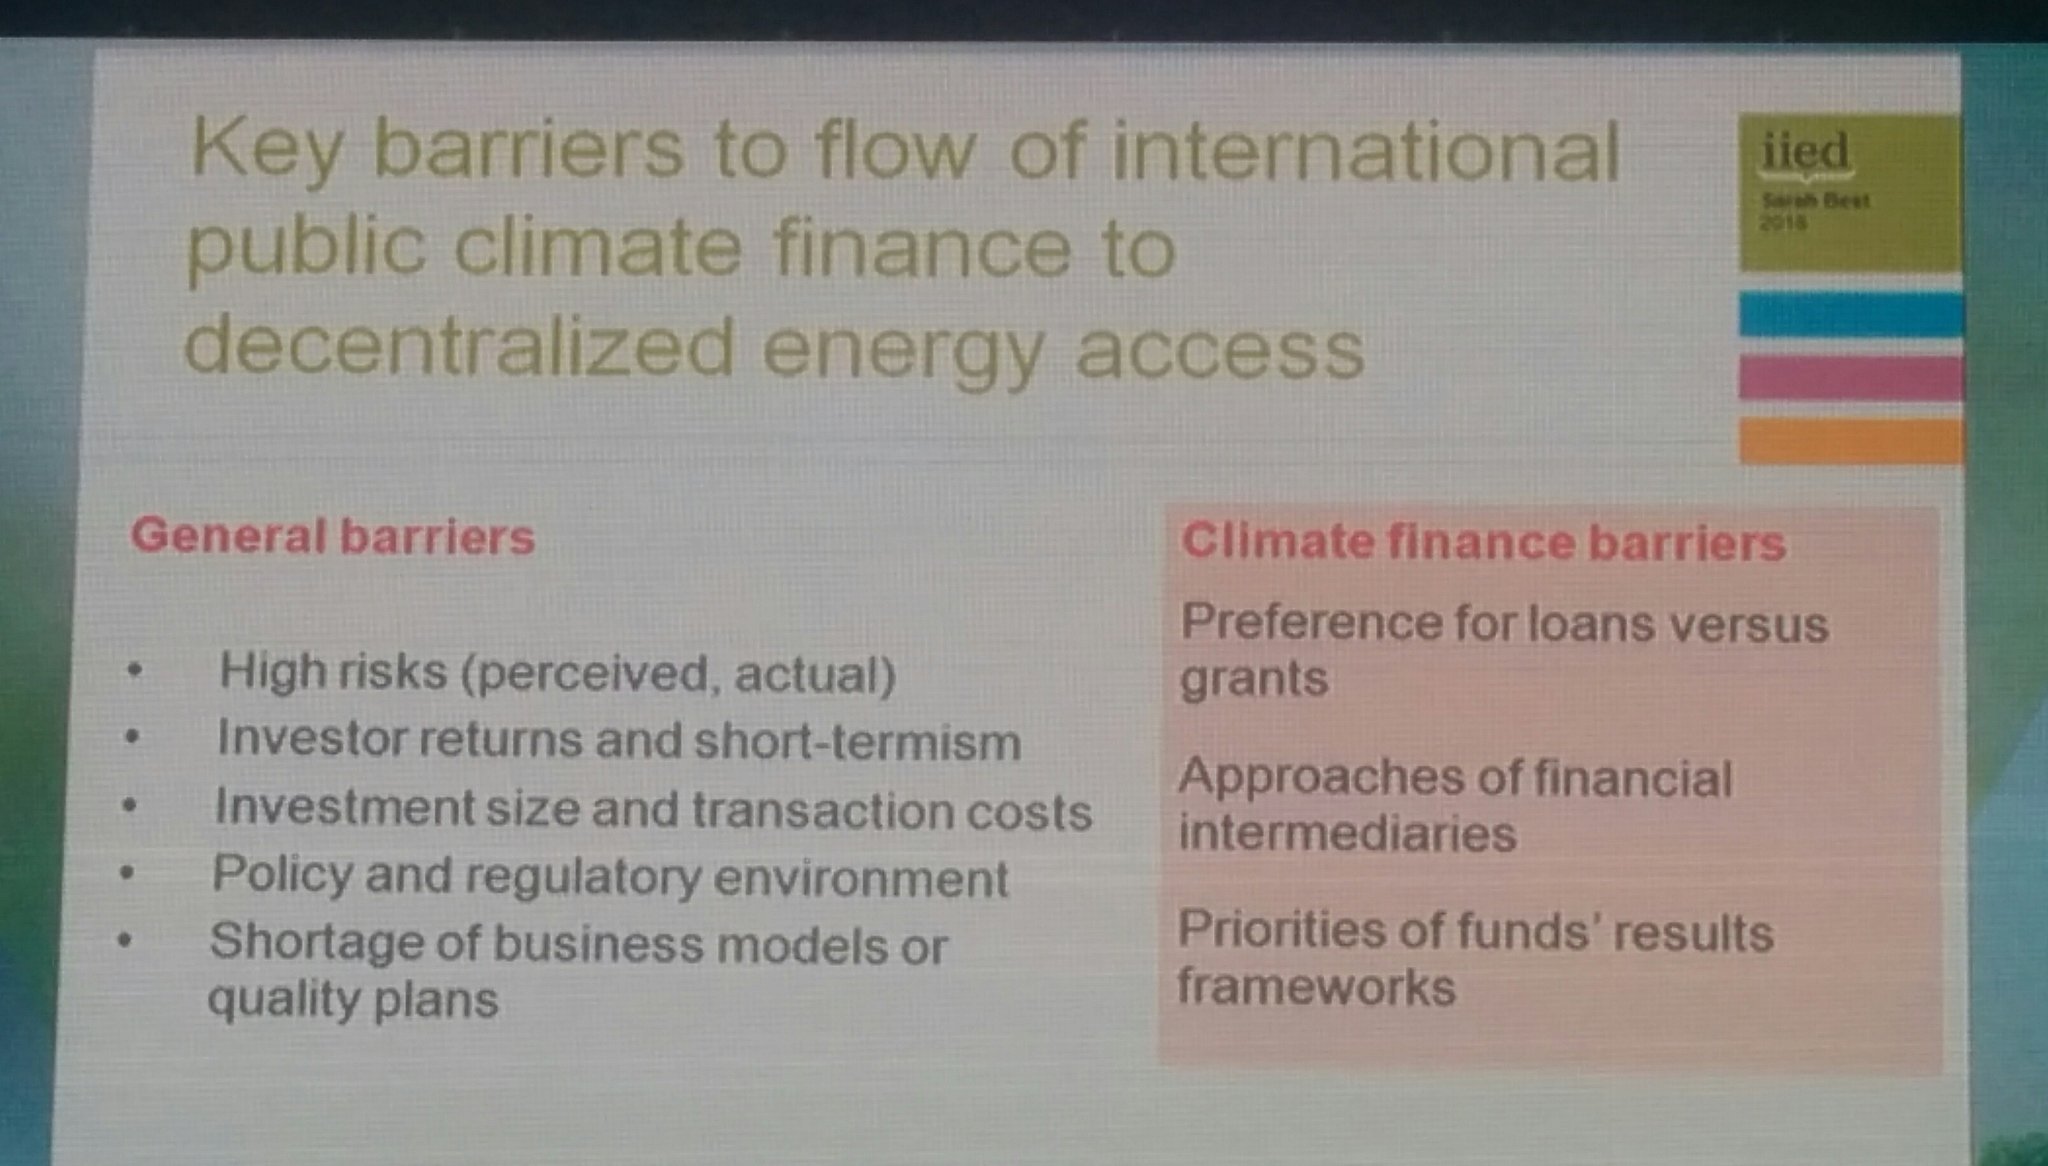 Three #climatefinance barriers identified by Best, including a preference for loans rather than grants for #energyaccess #COP22 https://t.co/06ZwVD0JEB